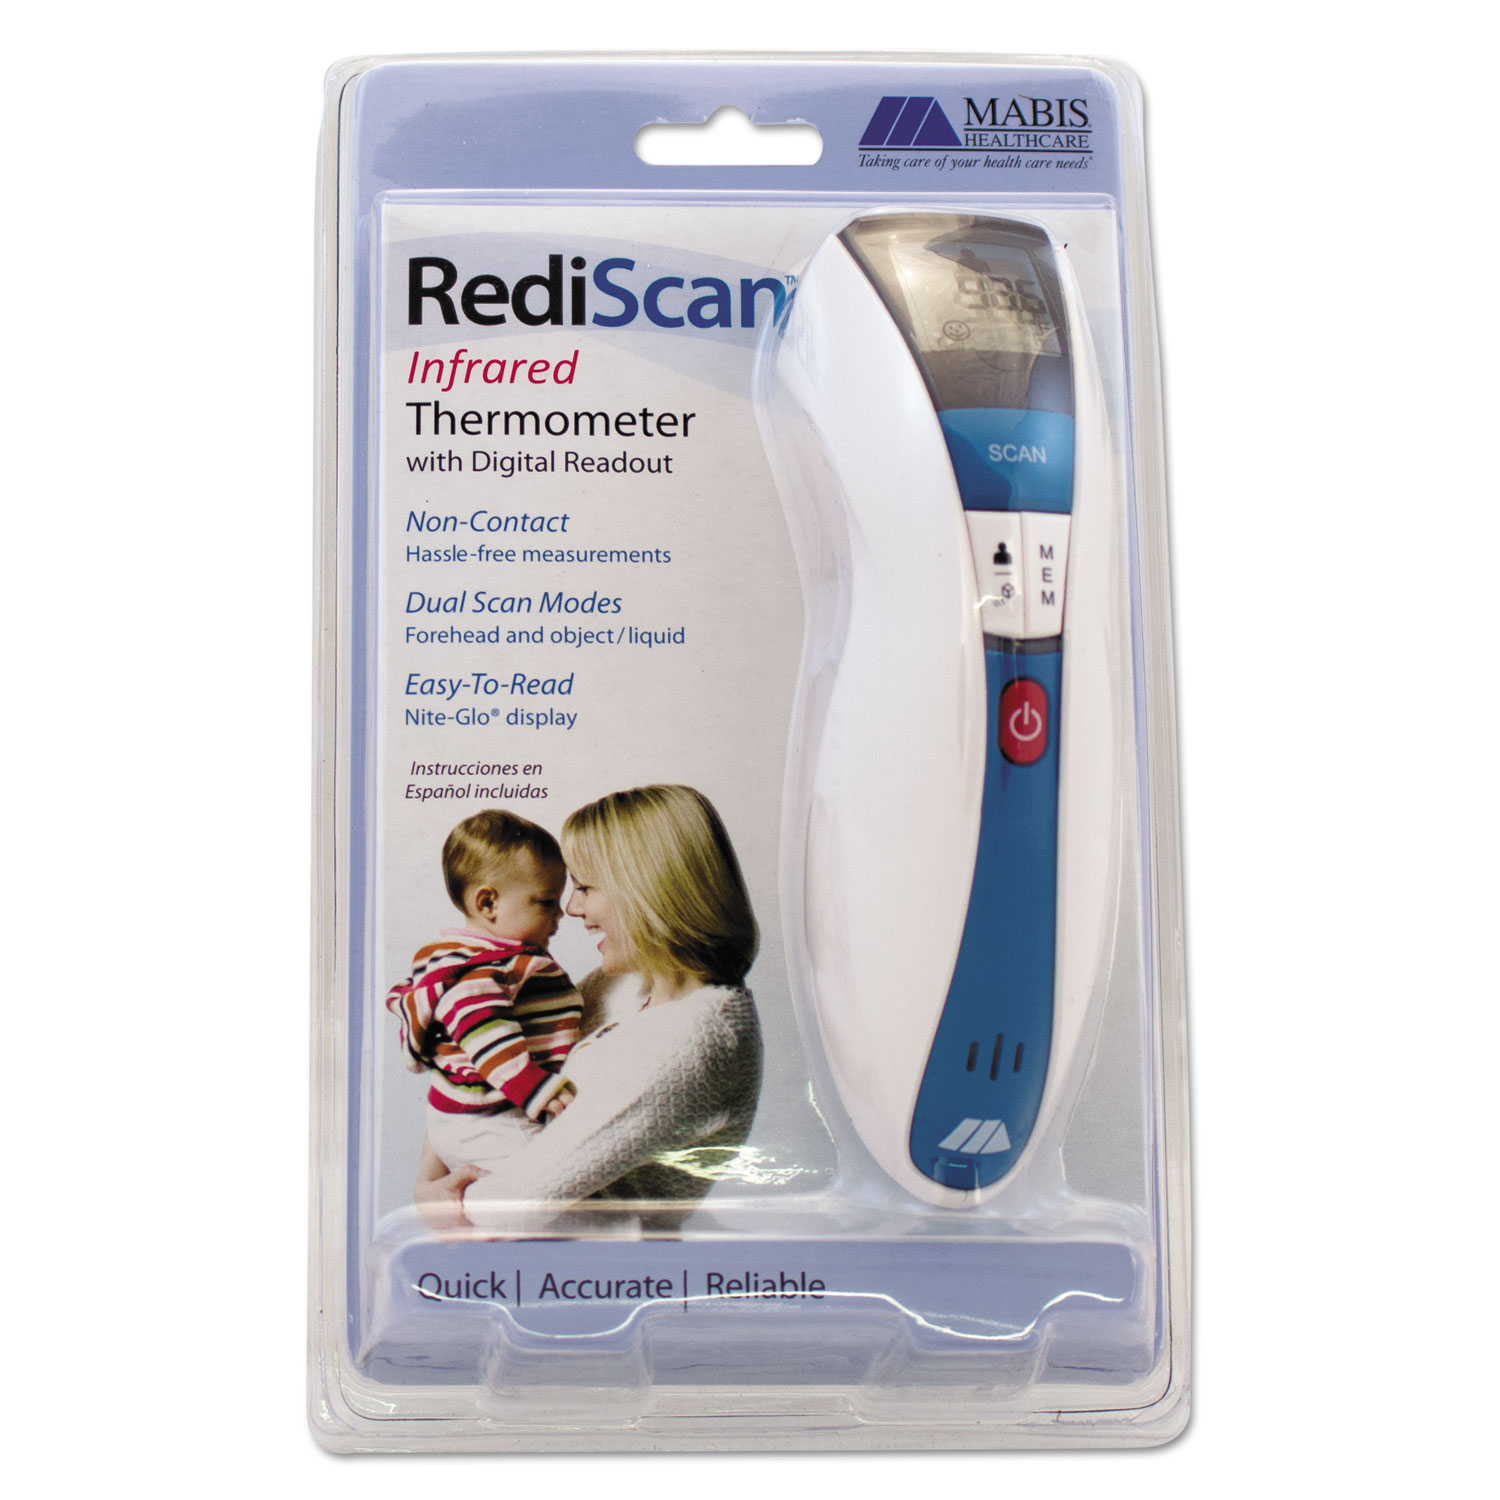 RediScan Infrared Thermometer w/Digital Readout, White/Blue, 50F122F